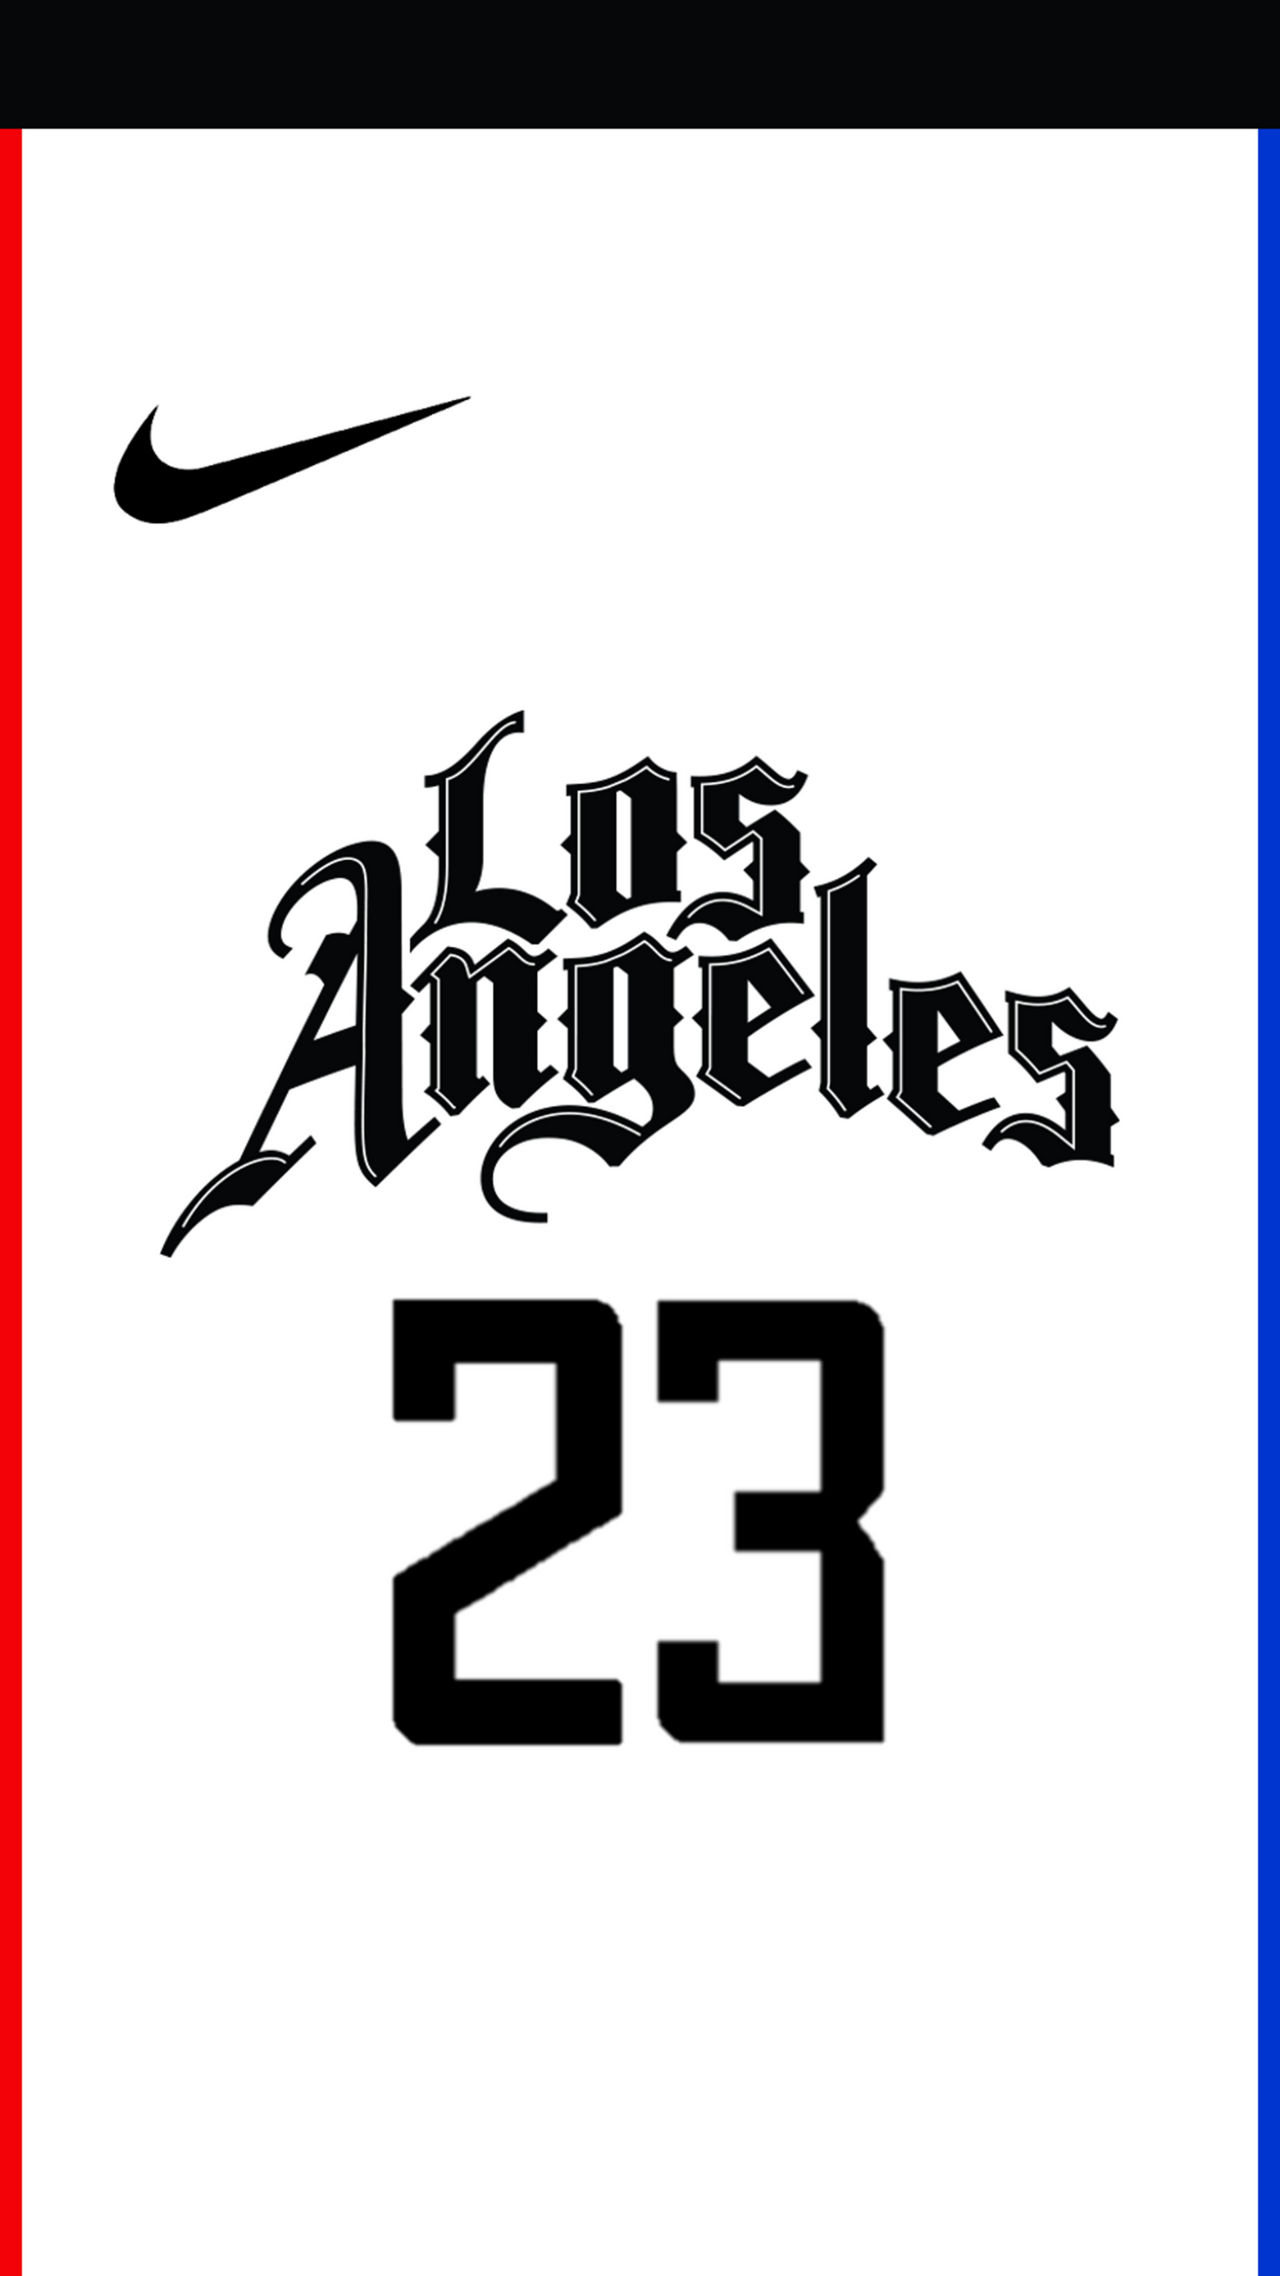 Los Angeles Clippers 2018-19 City Jersey by llu258 on DeviantArt